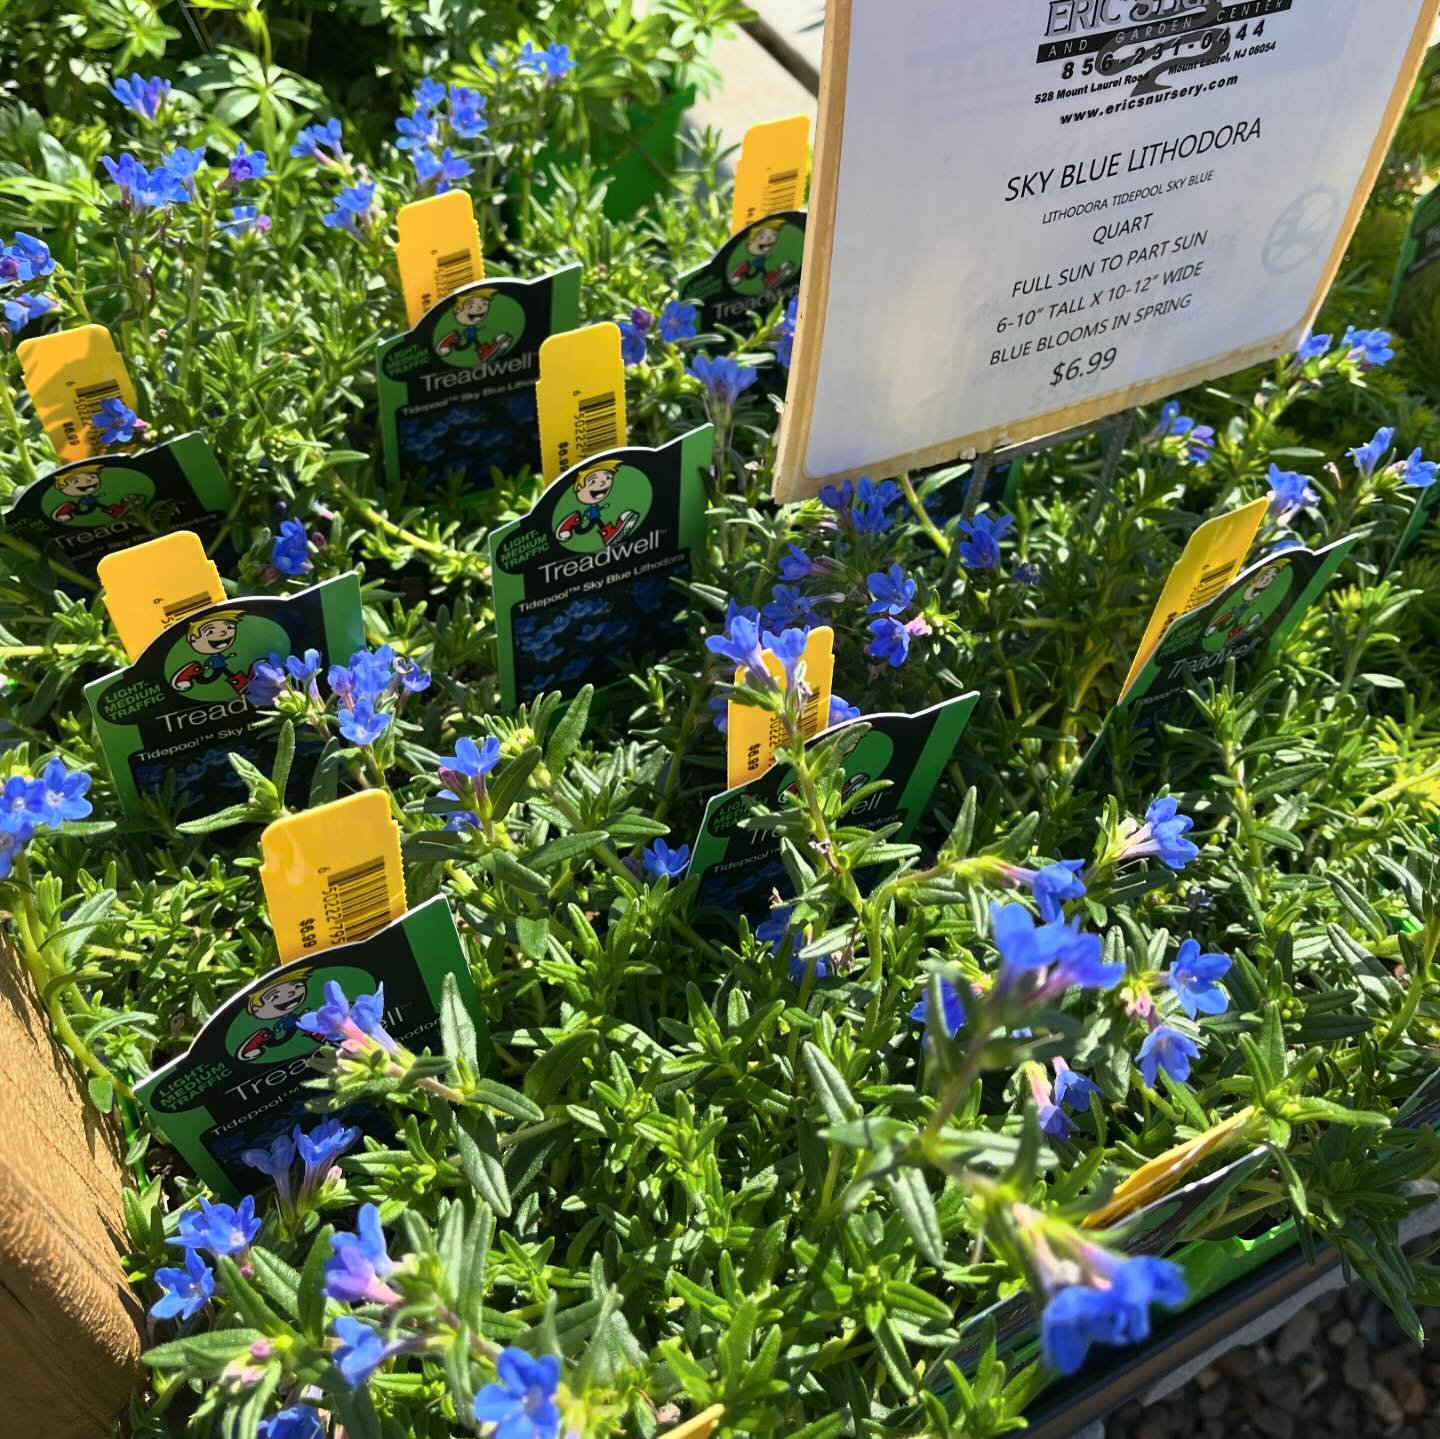 Come check out our stunning selections in the nursery ☀️💐